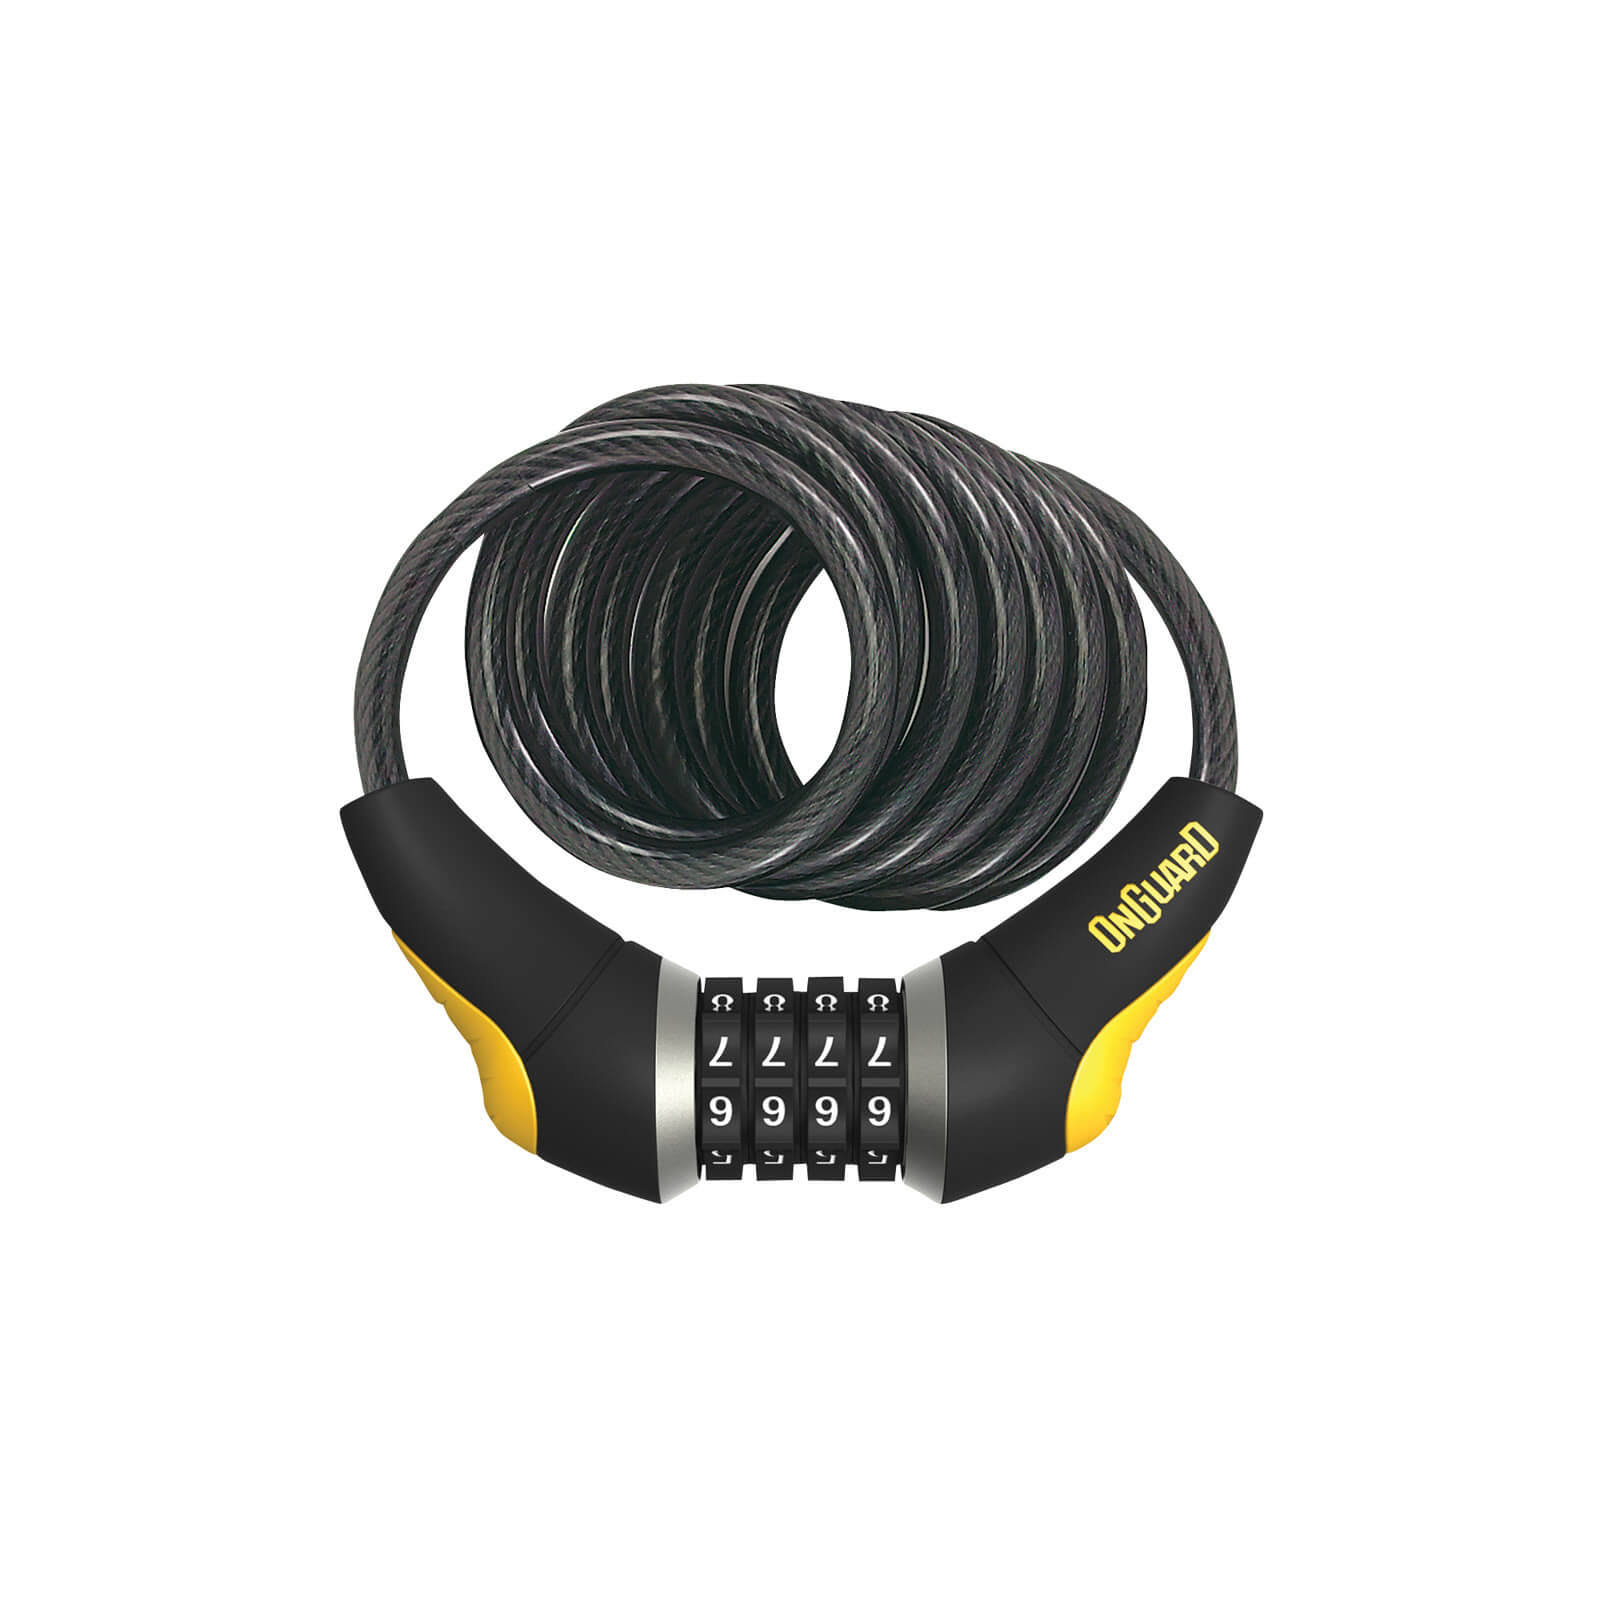 OnGuard Doberman Bicycle Coil Cable Lock